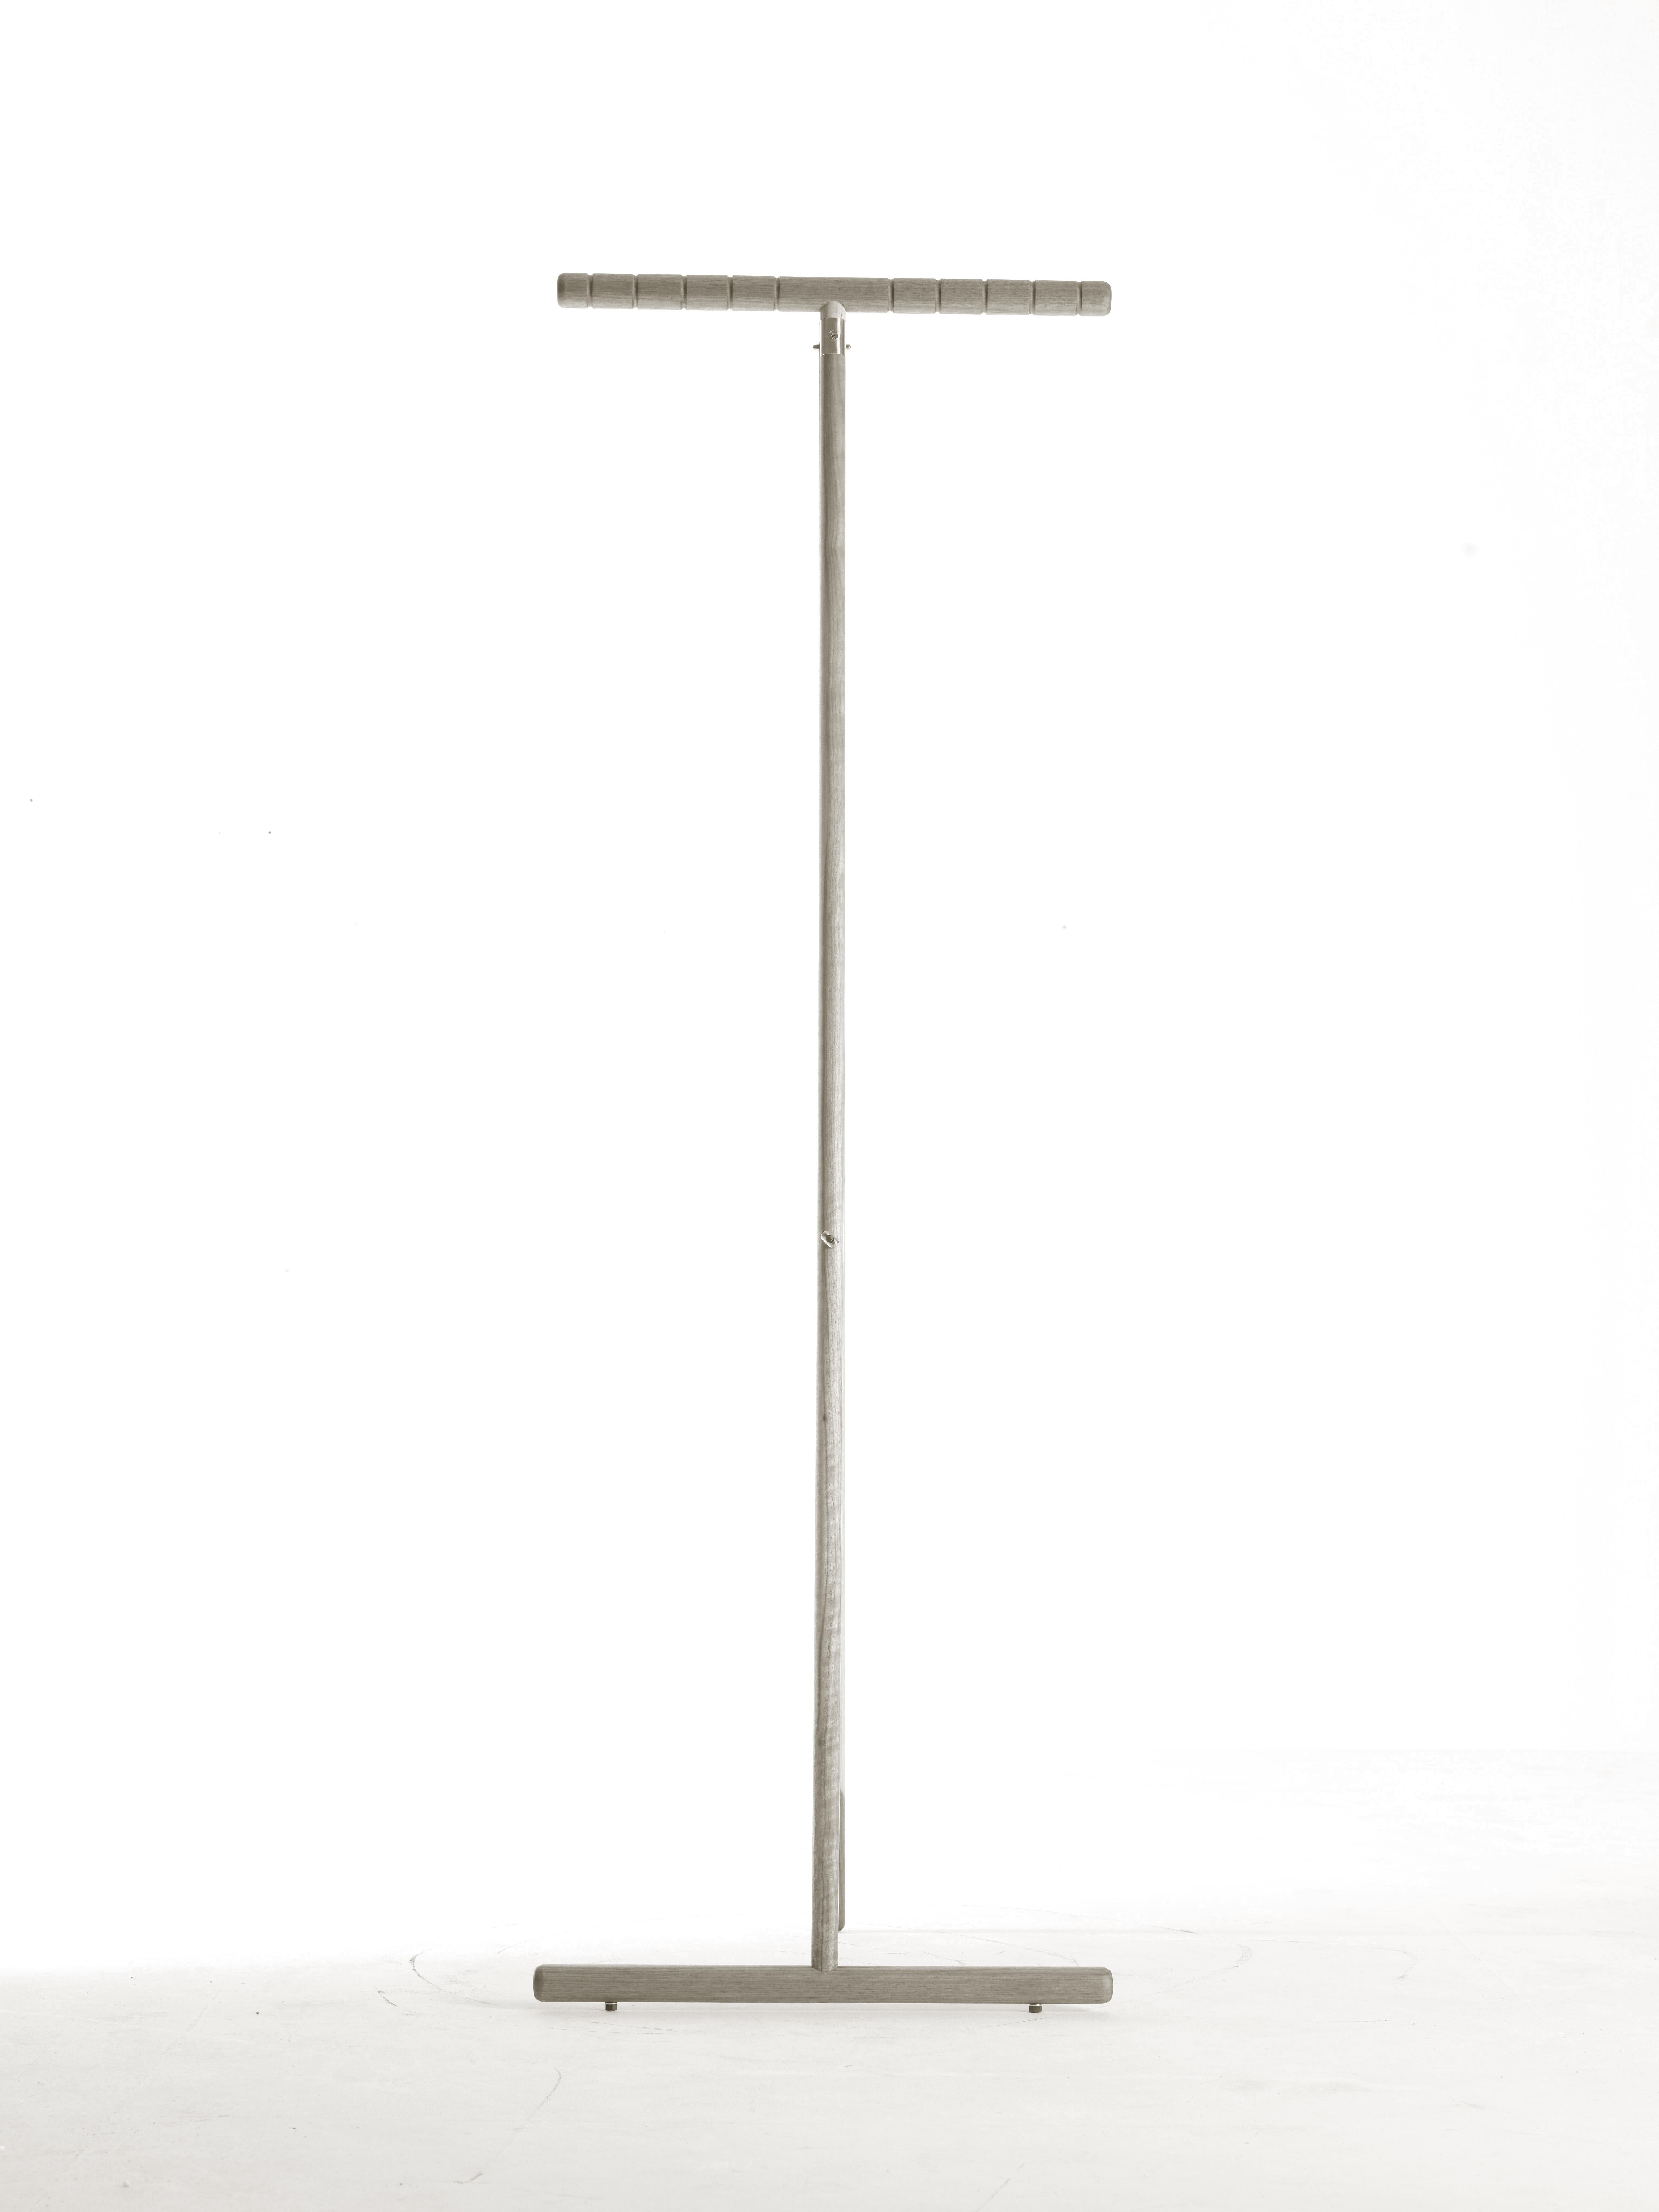 Modern Spalla Solid Wood Hanger, Walnut in Hand-Made Natural Grey Finish, Contemporary For Sale